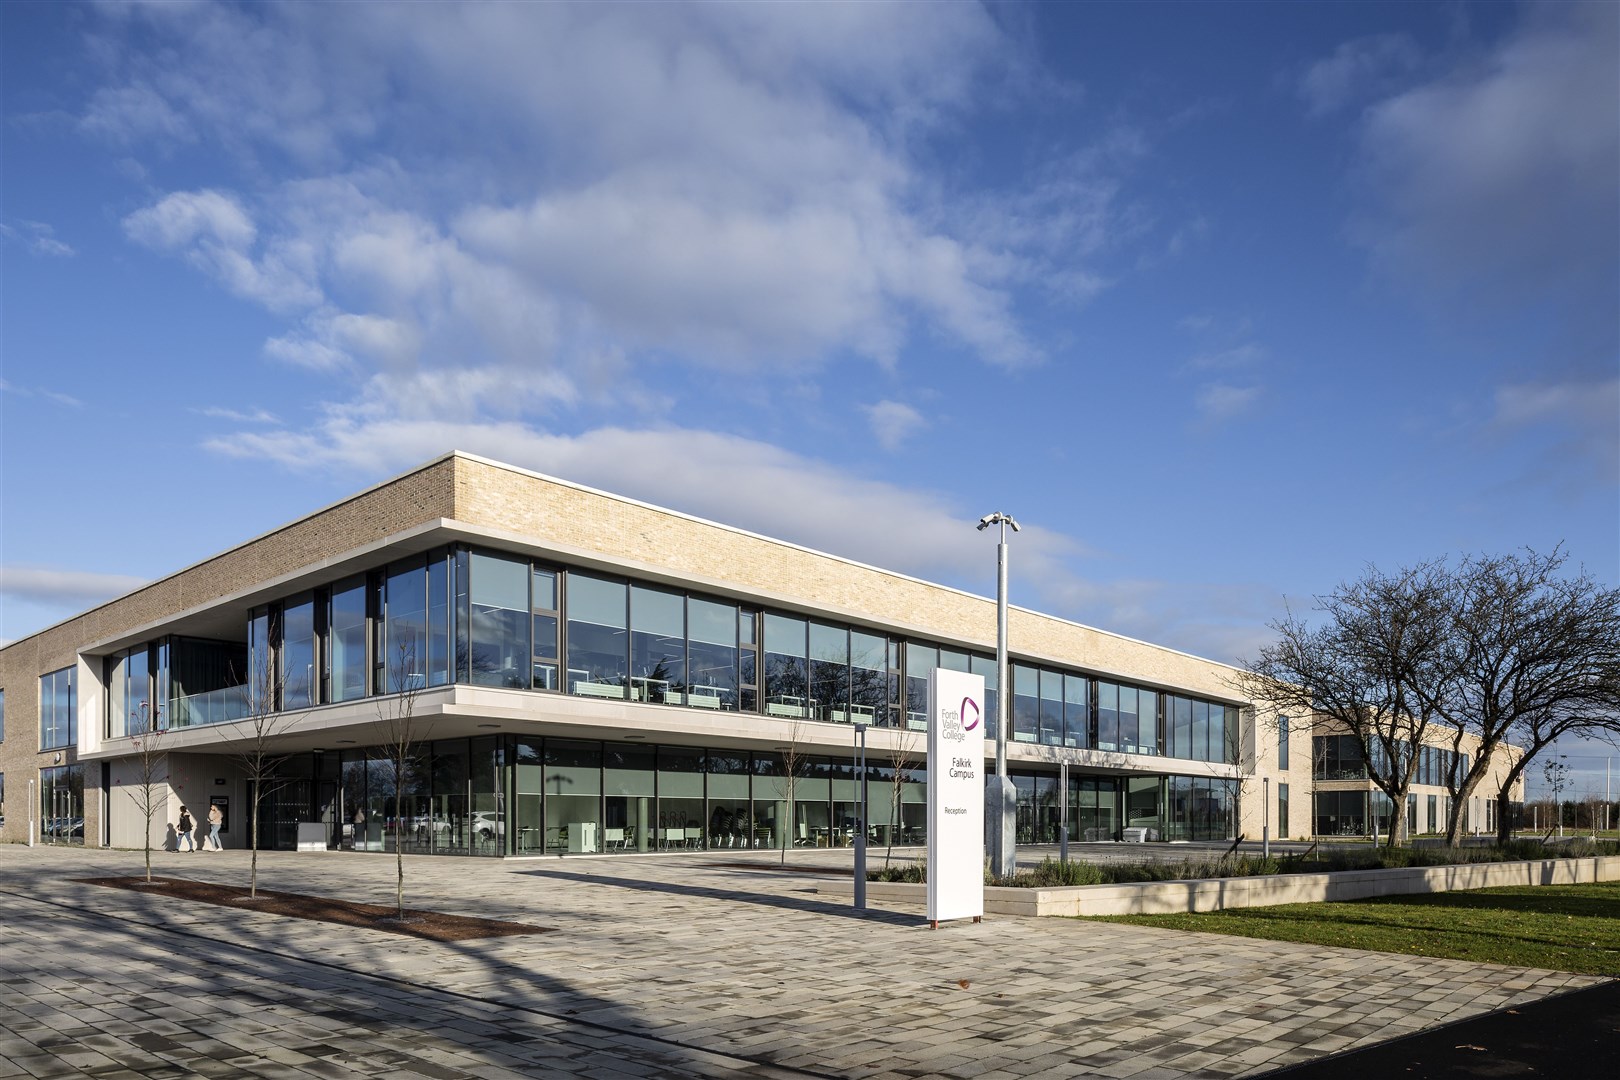 Also nominated is Forth Valley College – Falkirk Campus, in Scotland, designed by Reiach and Hall Architects (RIBA/PA)